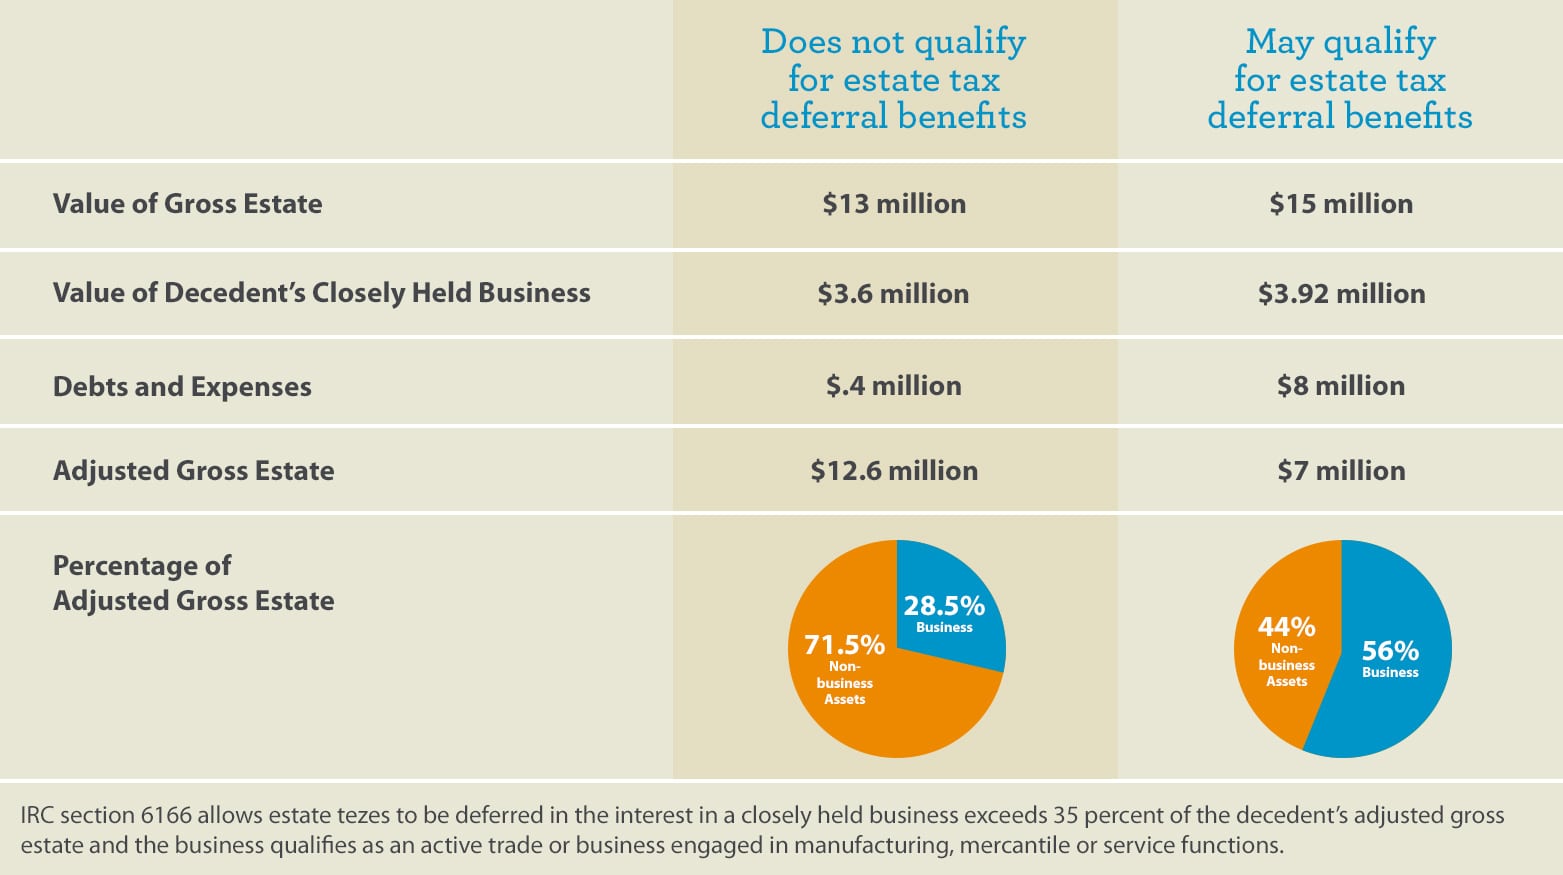 A chart shows two examples, one of which qualifies for estate tax deferral benefits under IRC 6166, and one of which does not. The qualifying business has a gross estate valued at $13 million, the business valued at $3.6 million, $0.4 million in debts and expenses, and adjusted gross estate of $12.6 million, meaning 28.5% of the estate is the business. In the non-qualifying example, the value of the gross estate is $15 million, the value of the business is $3.92 million, there is $8 million in cash in debts and expenses, and the adjusted gross estate is $7 million. This means 56% of the estate is the business.